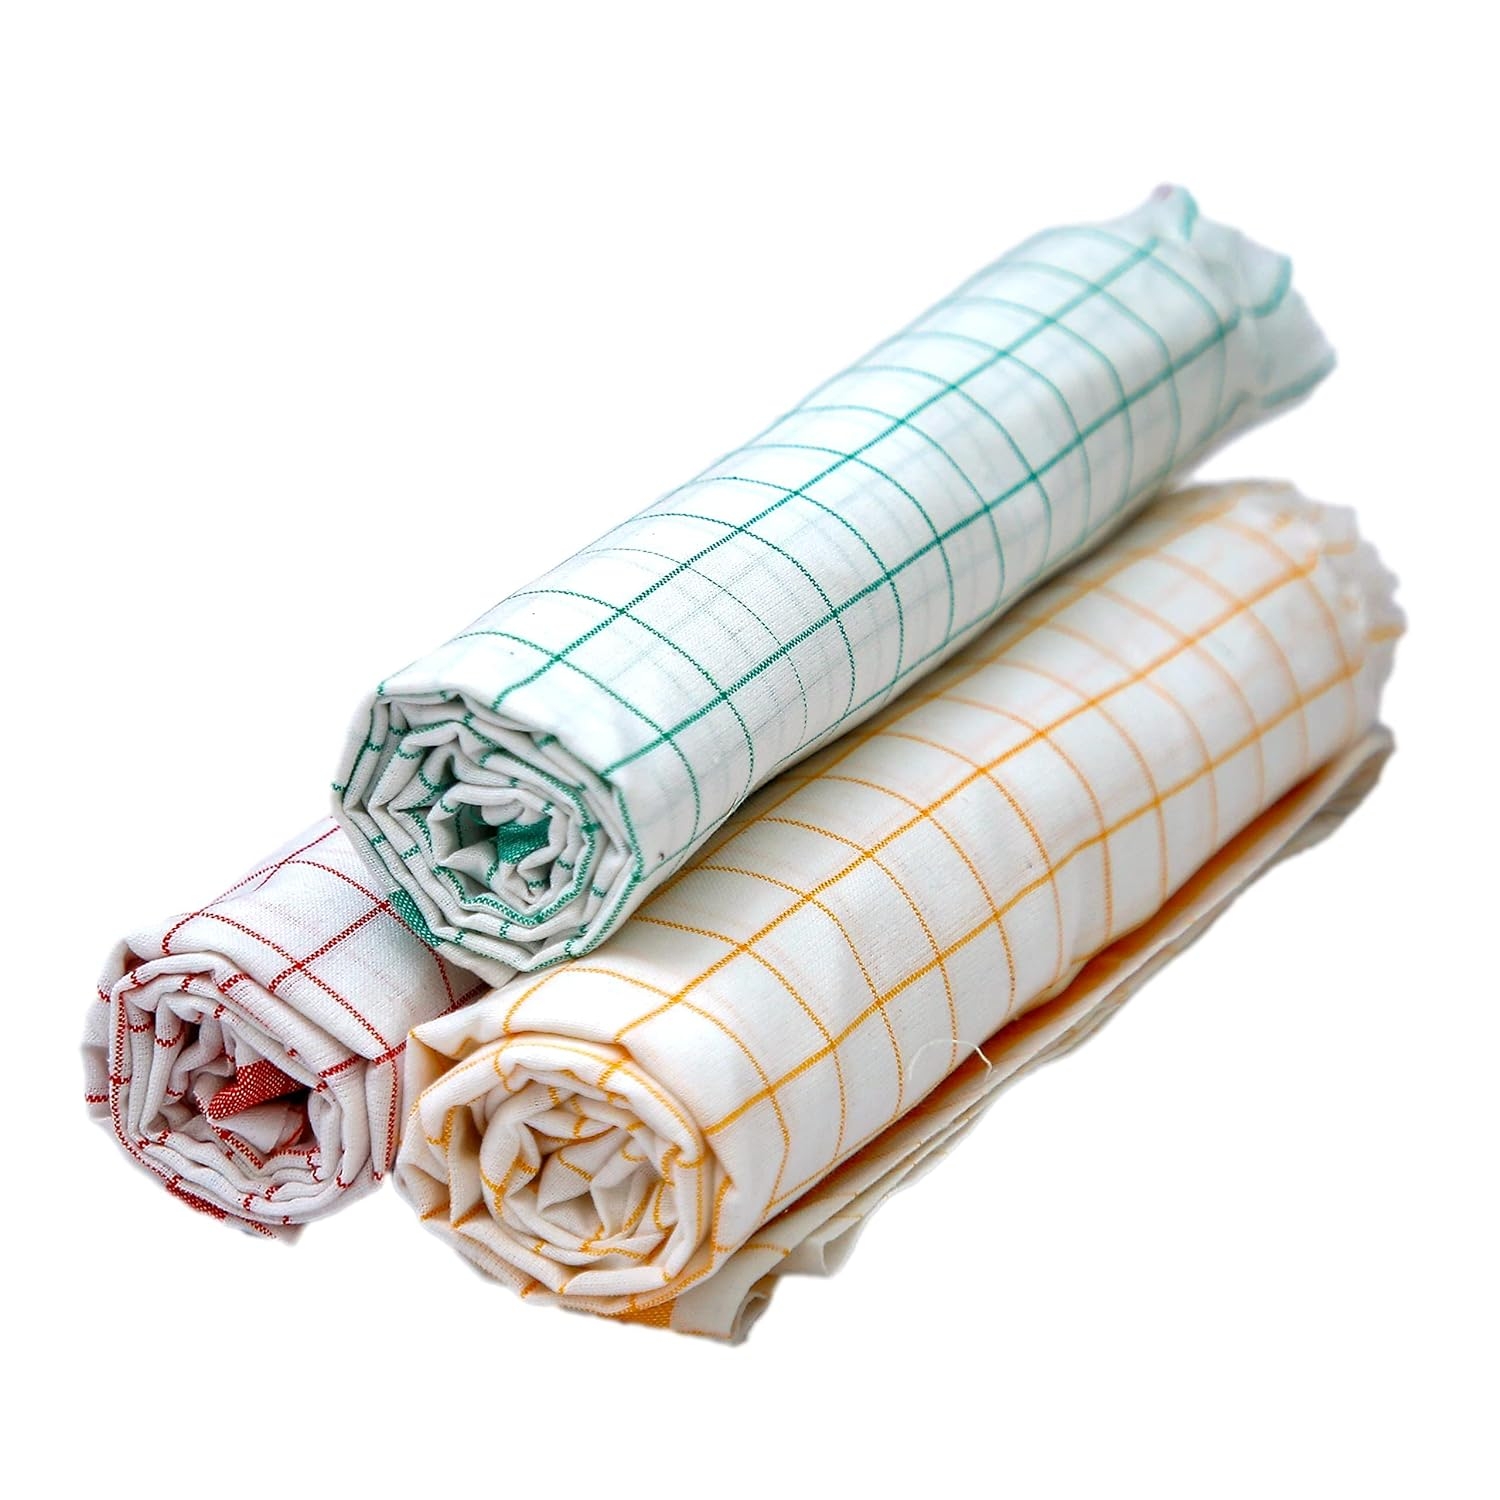 Cotton Handloom Large Bath Towel Set Size 75 X 150 cm for Daily Use Super Soft & Smooth & Quick Dry (2 pcs)